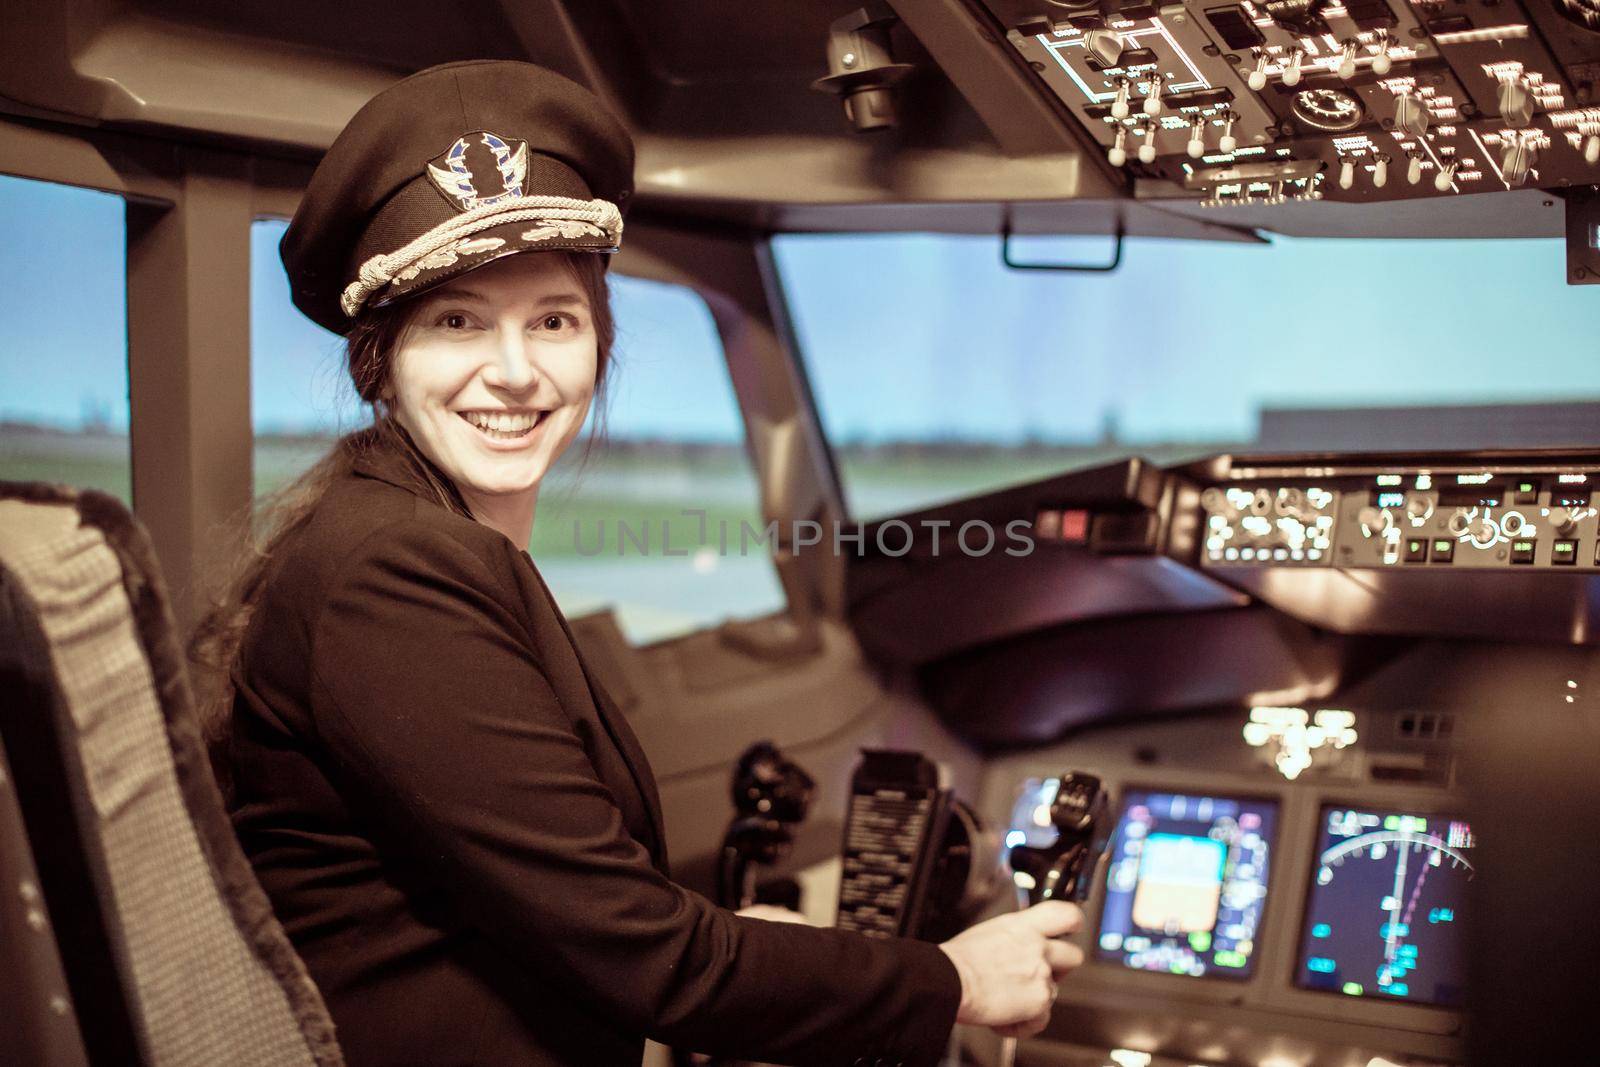 Beautiful woman pilot wearing uniform with epaulets, hat with golden wings sitting inside airliner. Girl looking at camera